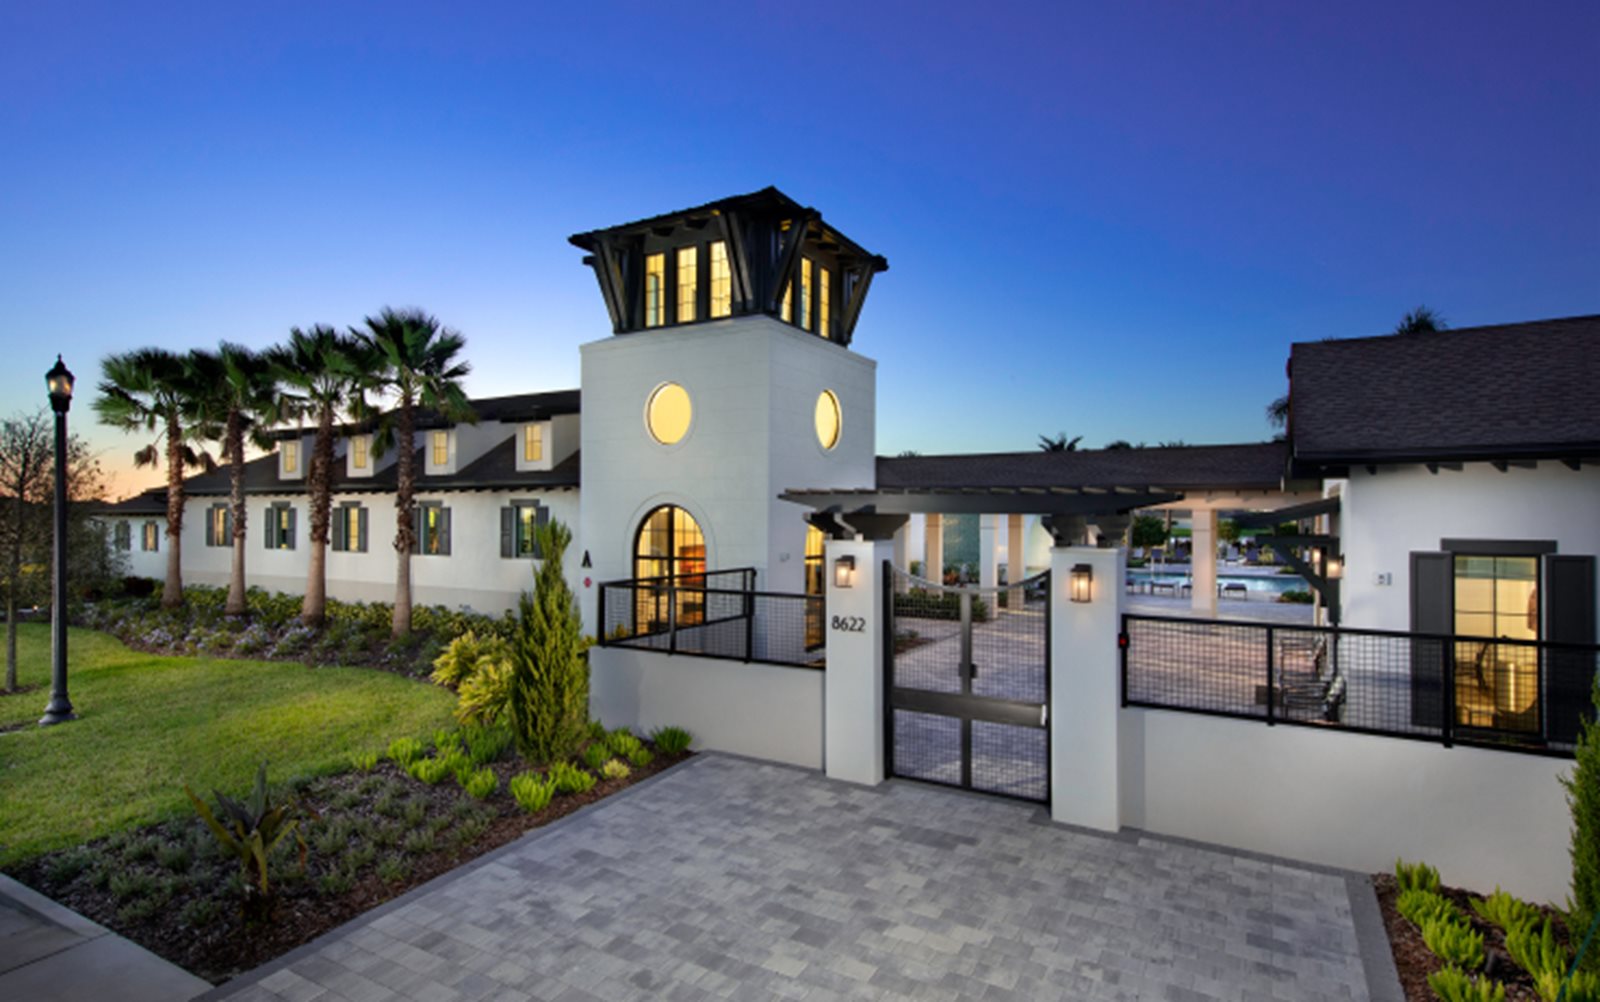 Featured image for “Relocate to Viera, FL – Voted Top 25 Master Planned Communities in the U.S.”